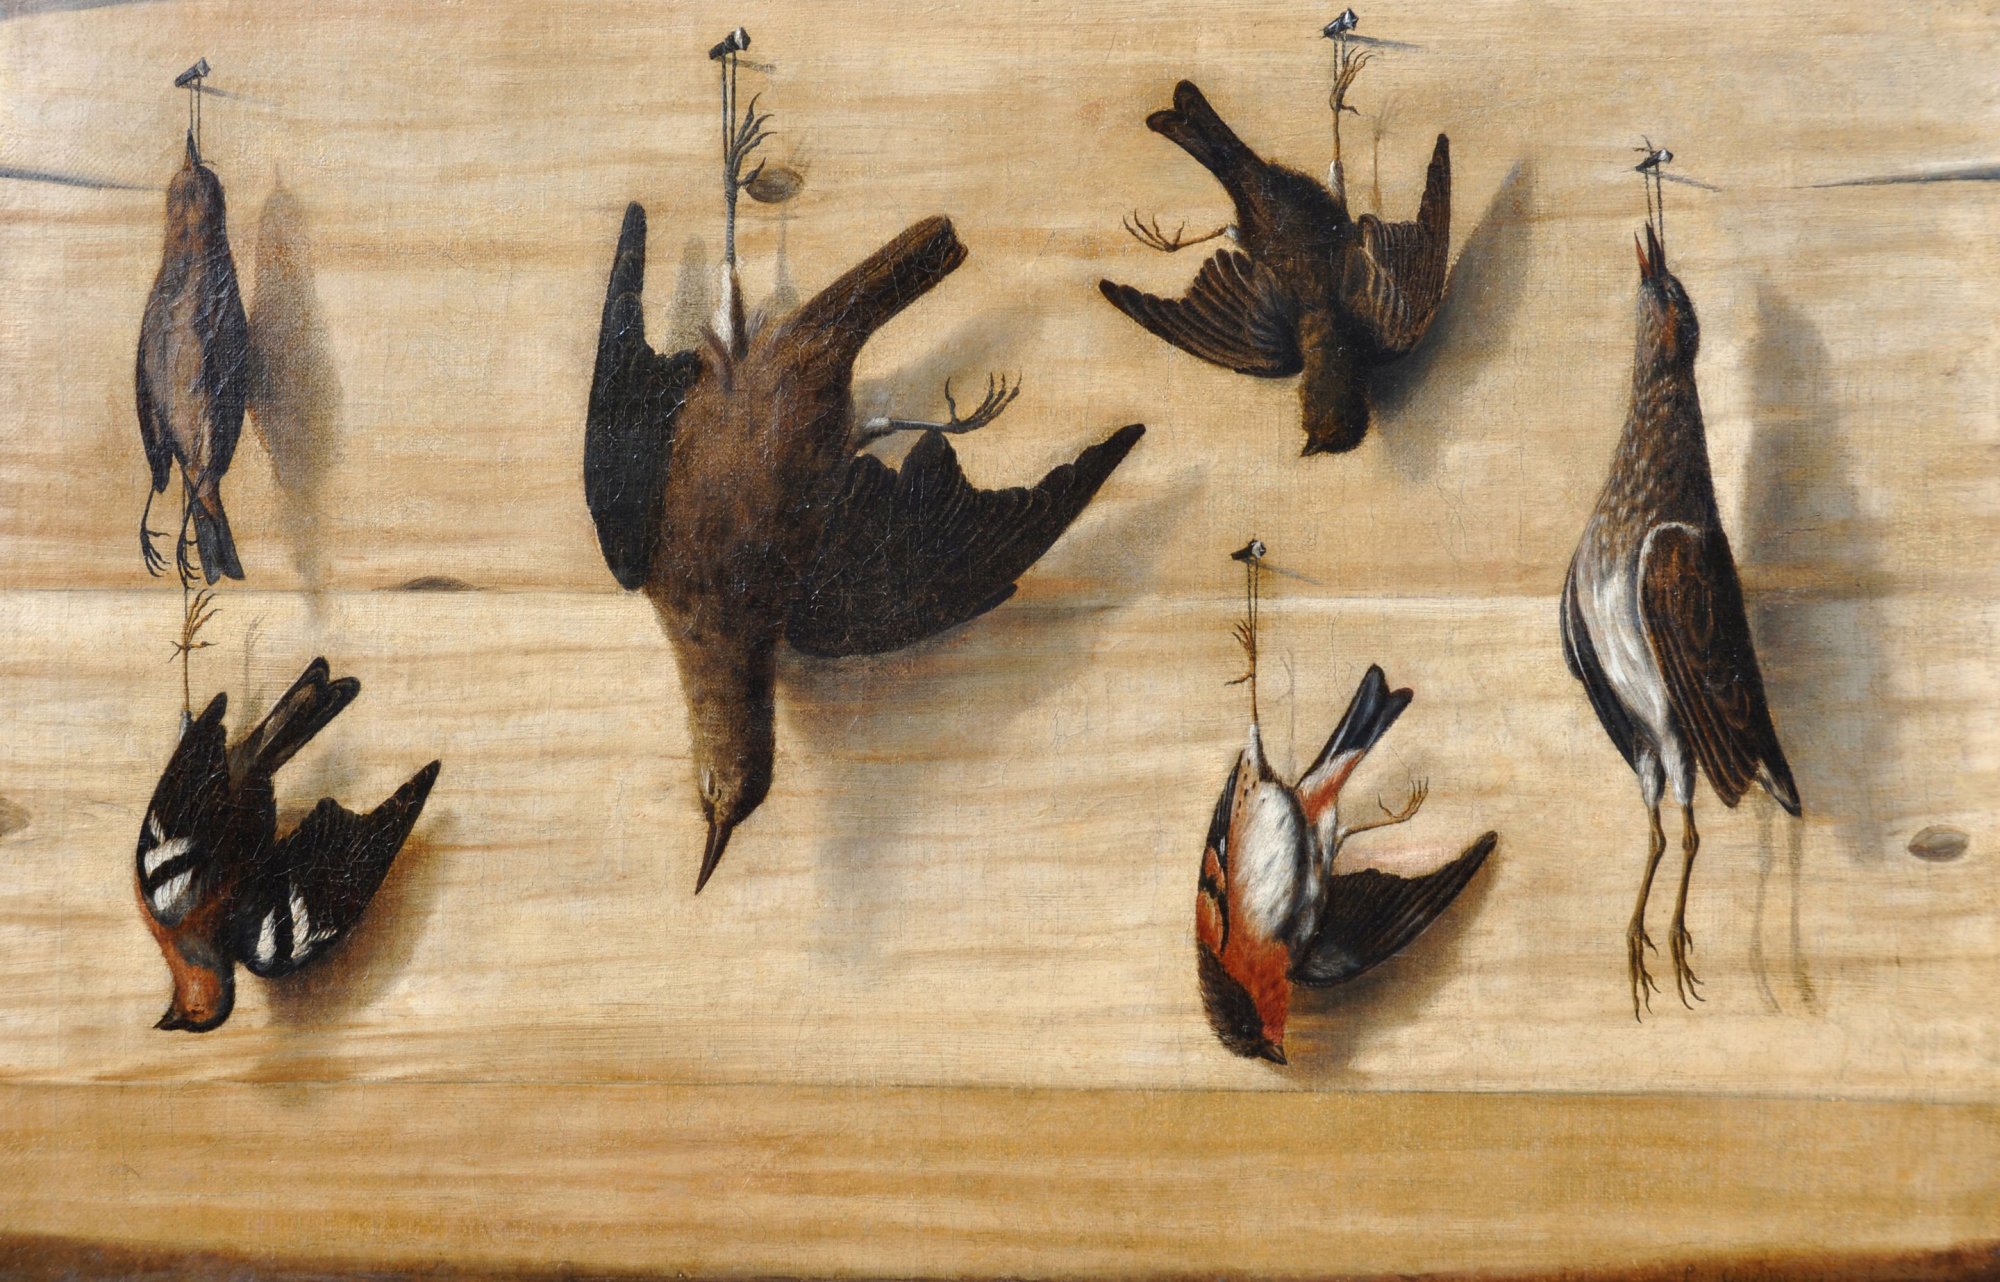 Laurent_Geedts_-_Trompe_l’oeil_still_life_of_birds_hanging_from_nails_against_a_wooden_wall.jpg